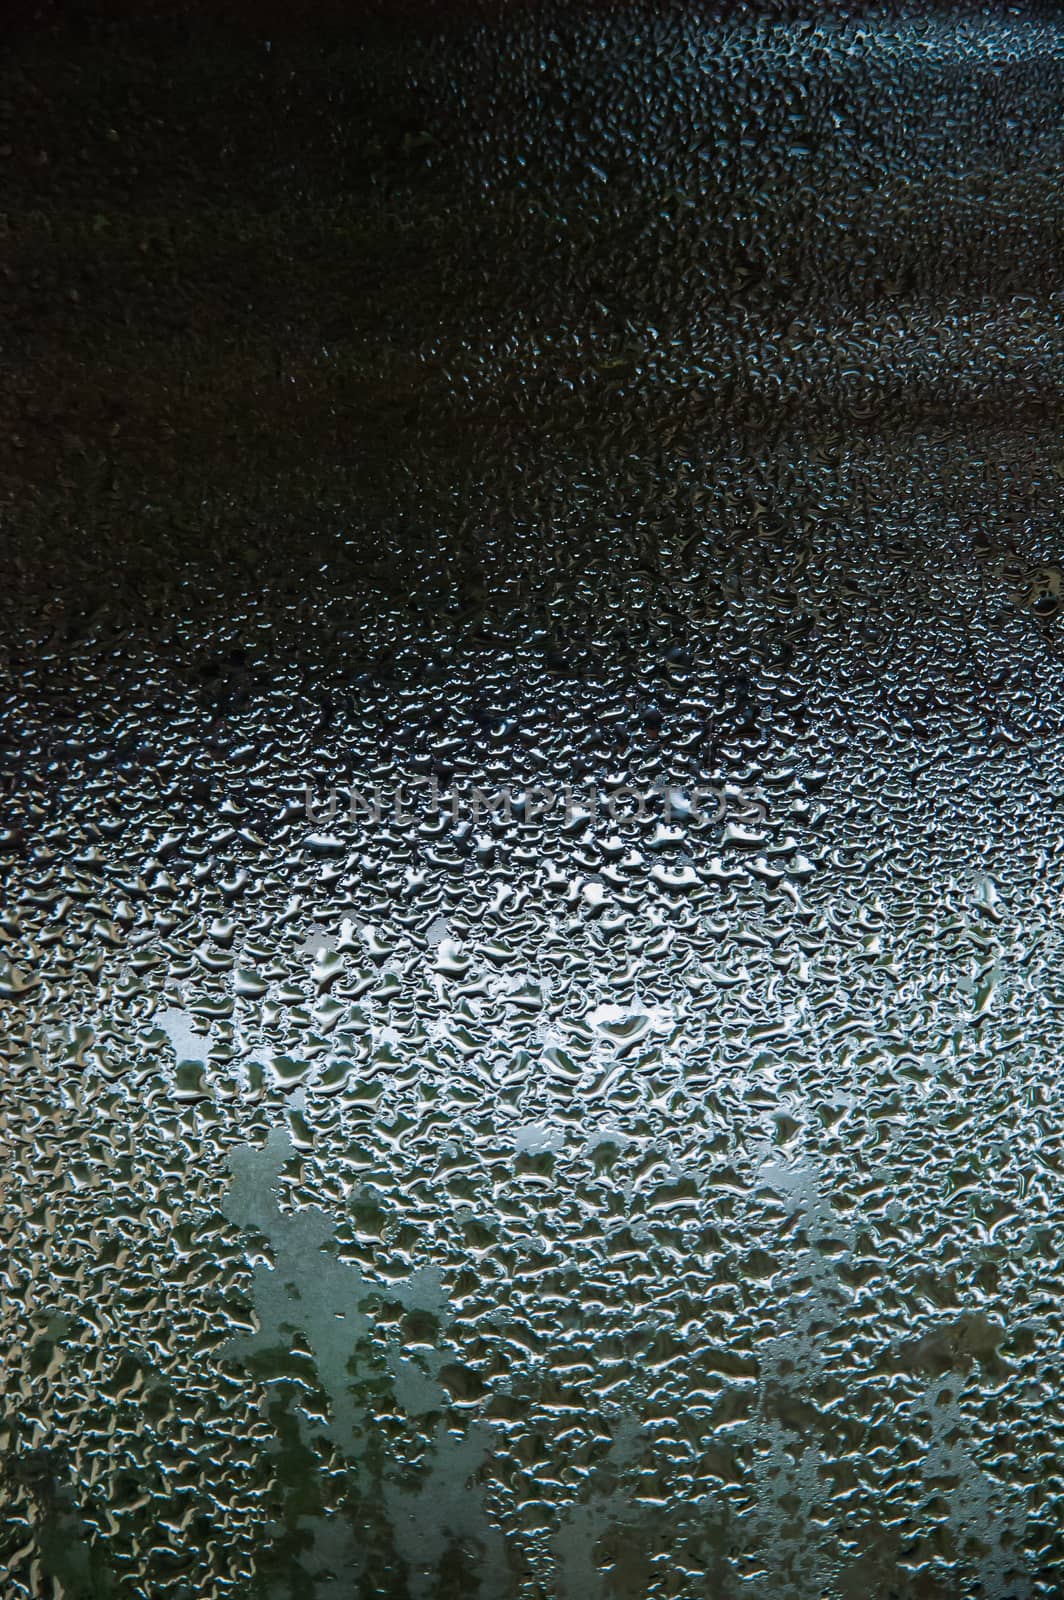 Water drops on a glass, with reflections on a dark background